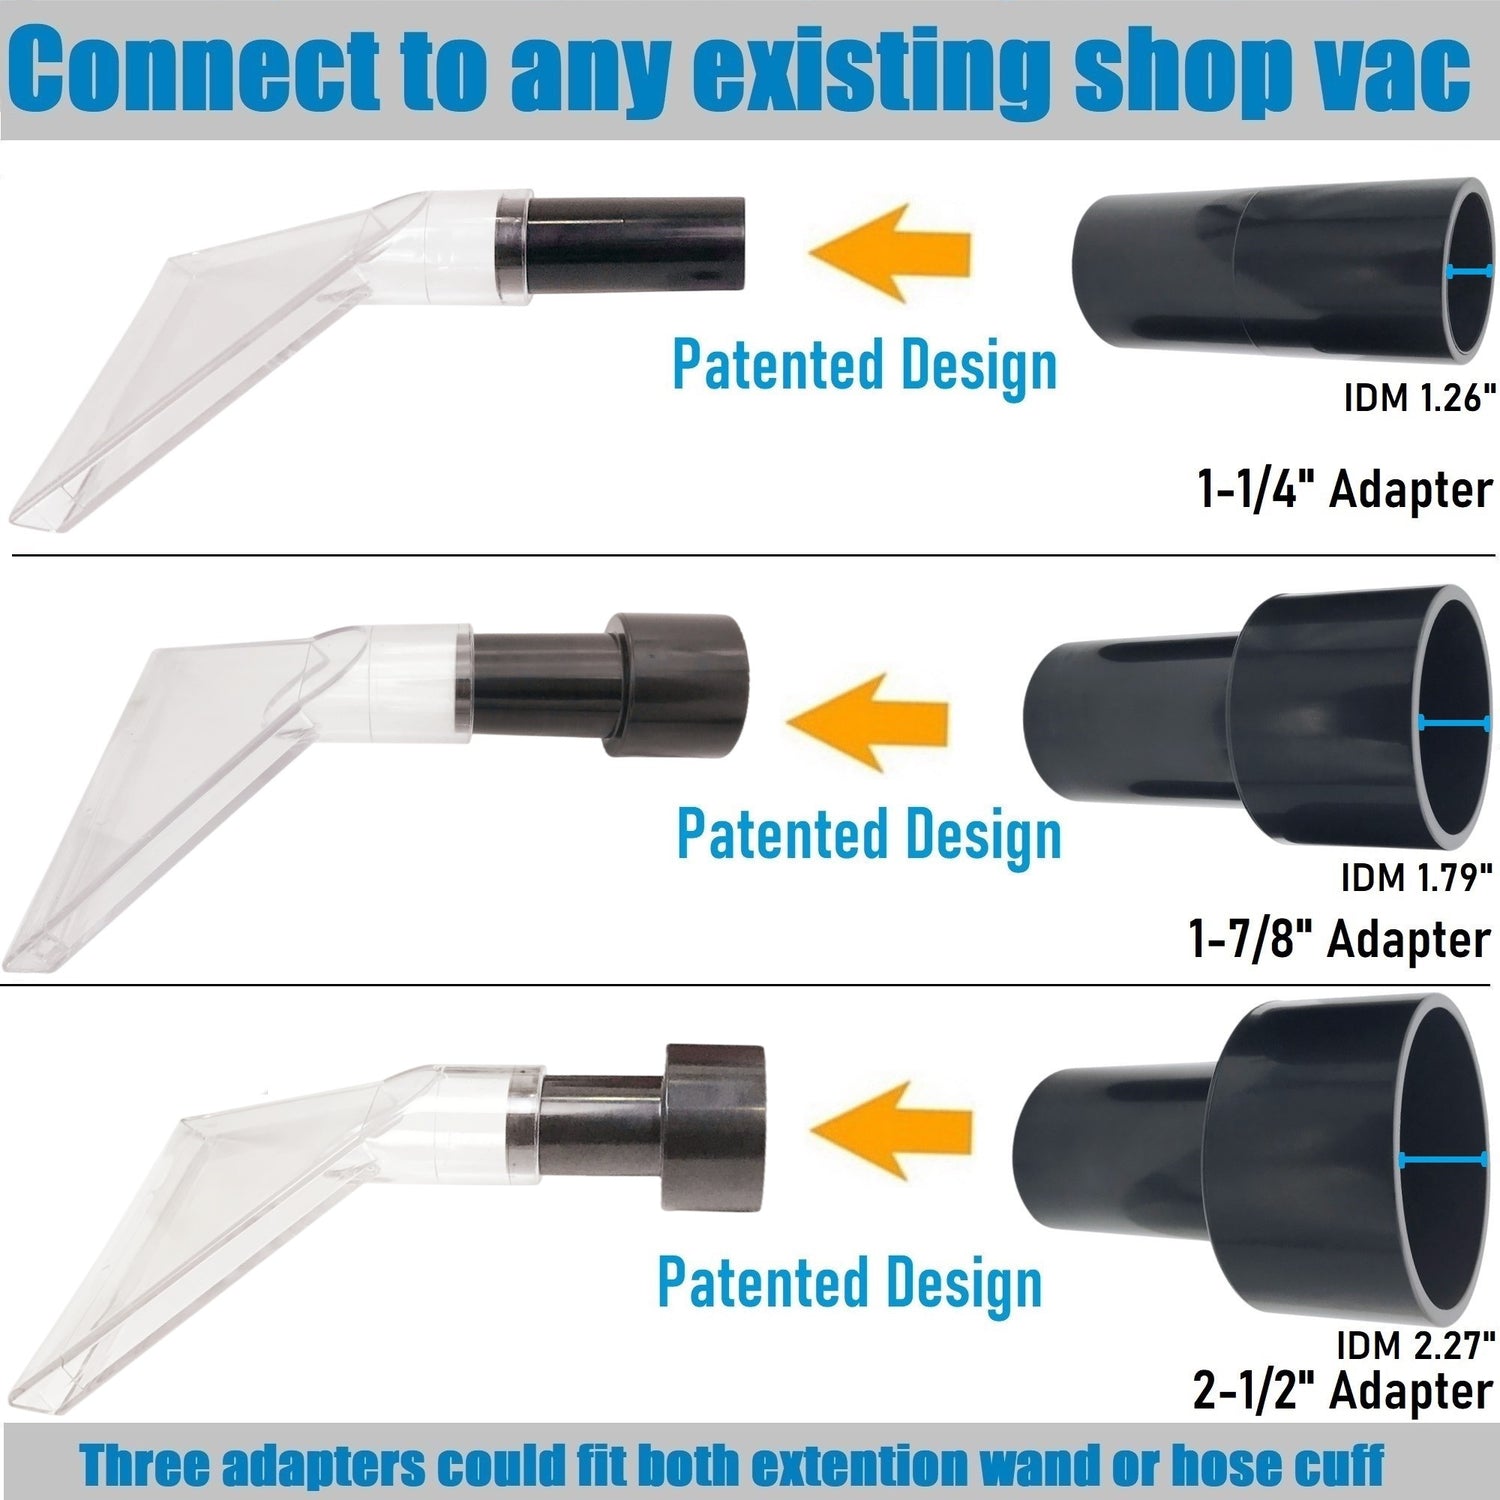 TunaMax Shop VAC Extractor Attachment with 1-1/4 & 1-7/8 Two Adapters for Upholstery & Carpet Cleaning and Car Detailing, Clear Nozzle Extraction